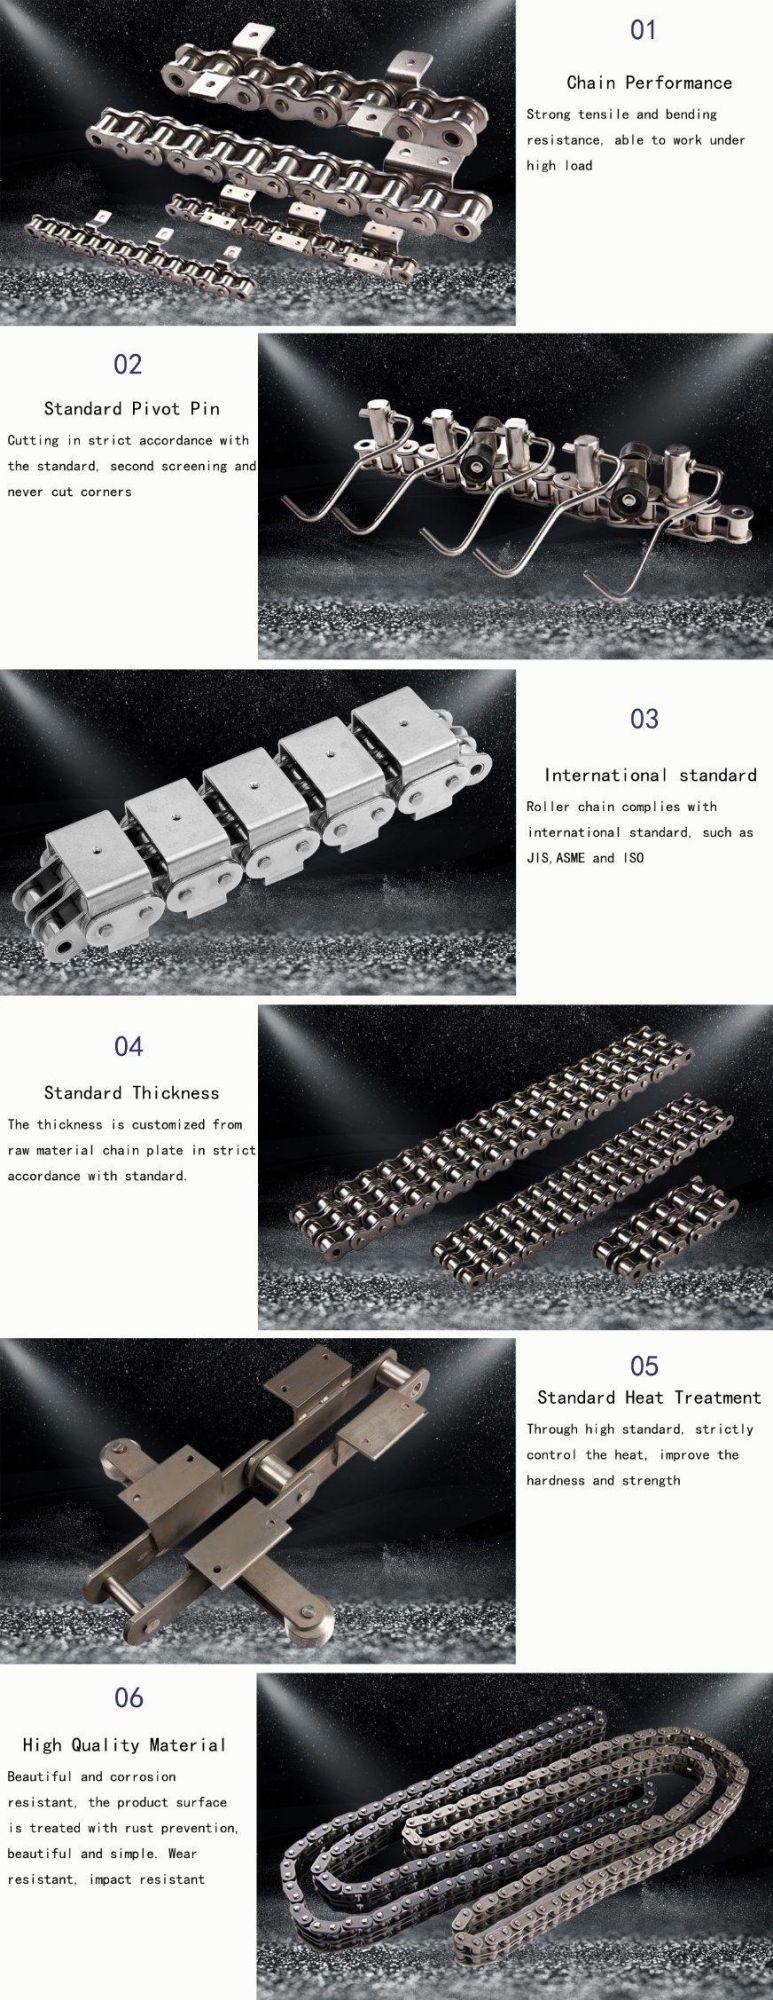 New Trend Short Pitch Roller Drive Chain Short Roller Chain Conveyor Chain with Attachment Wa1 & Wa2 & Wk1 & Wk2